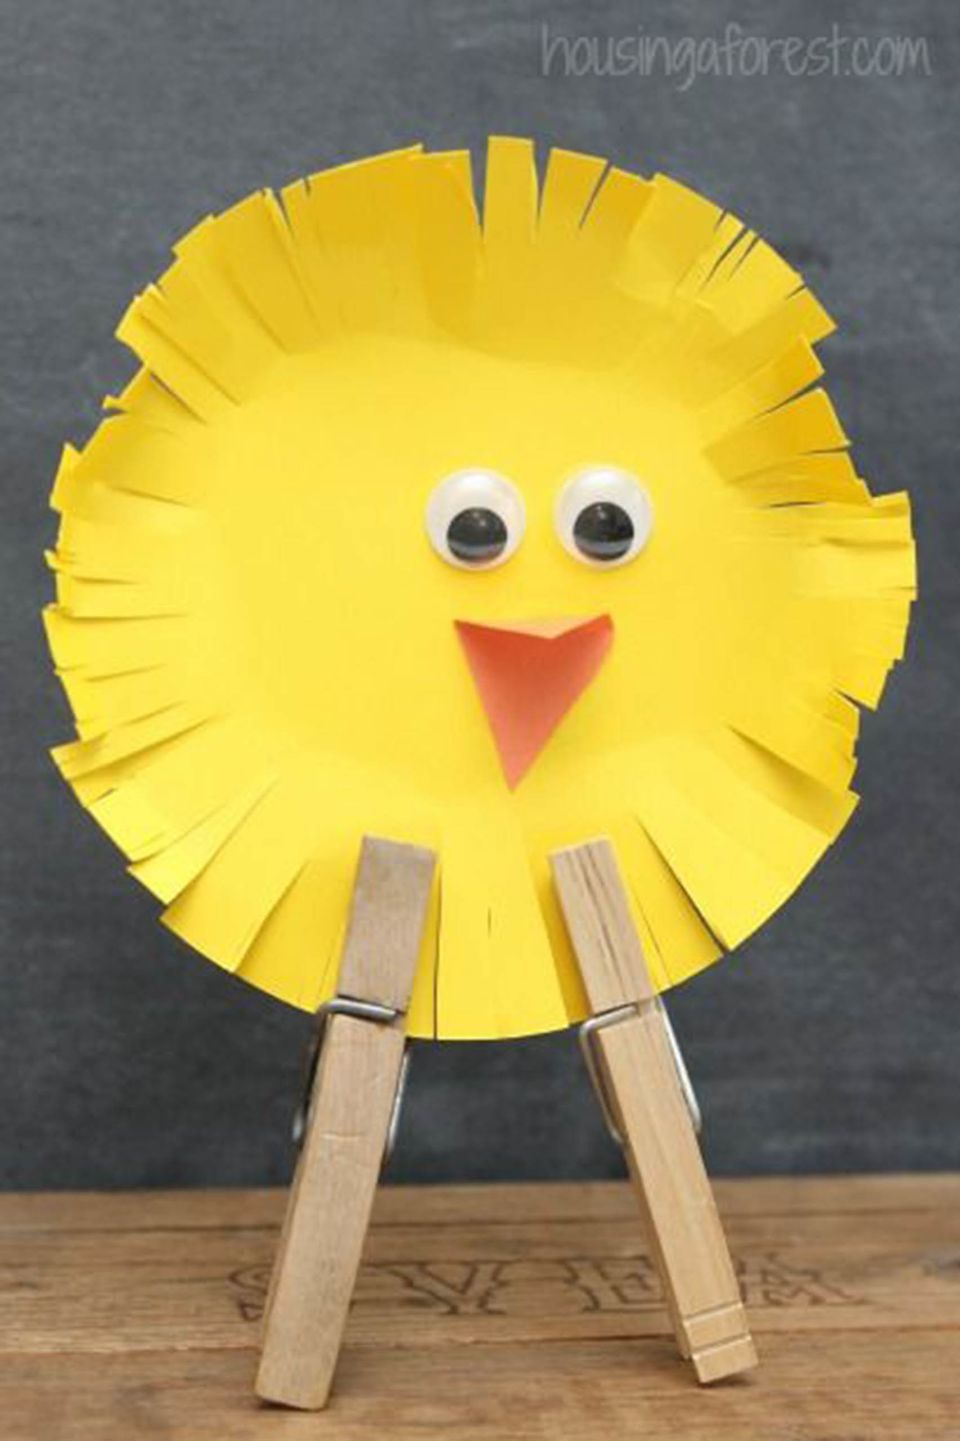 52 DIY Easter Crafts for Adults and Kids — Easy Easter Art